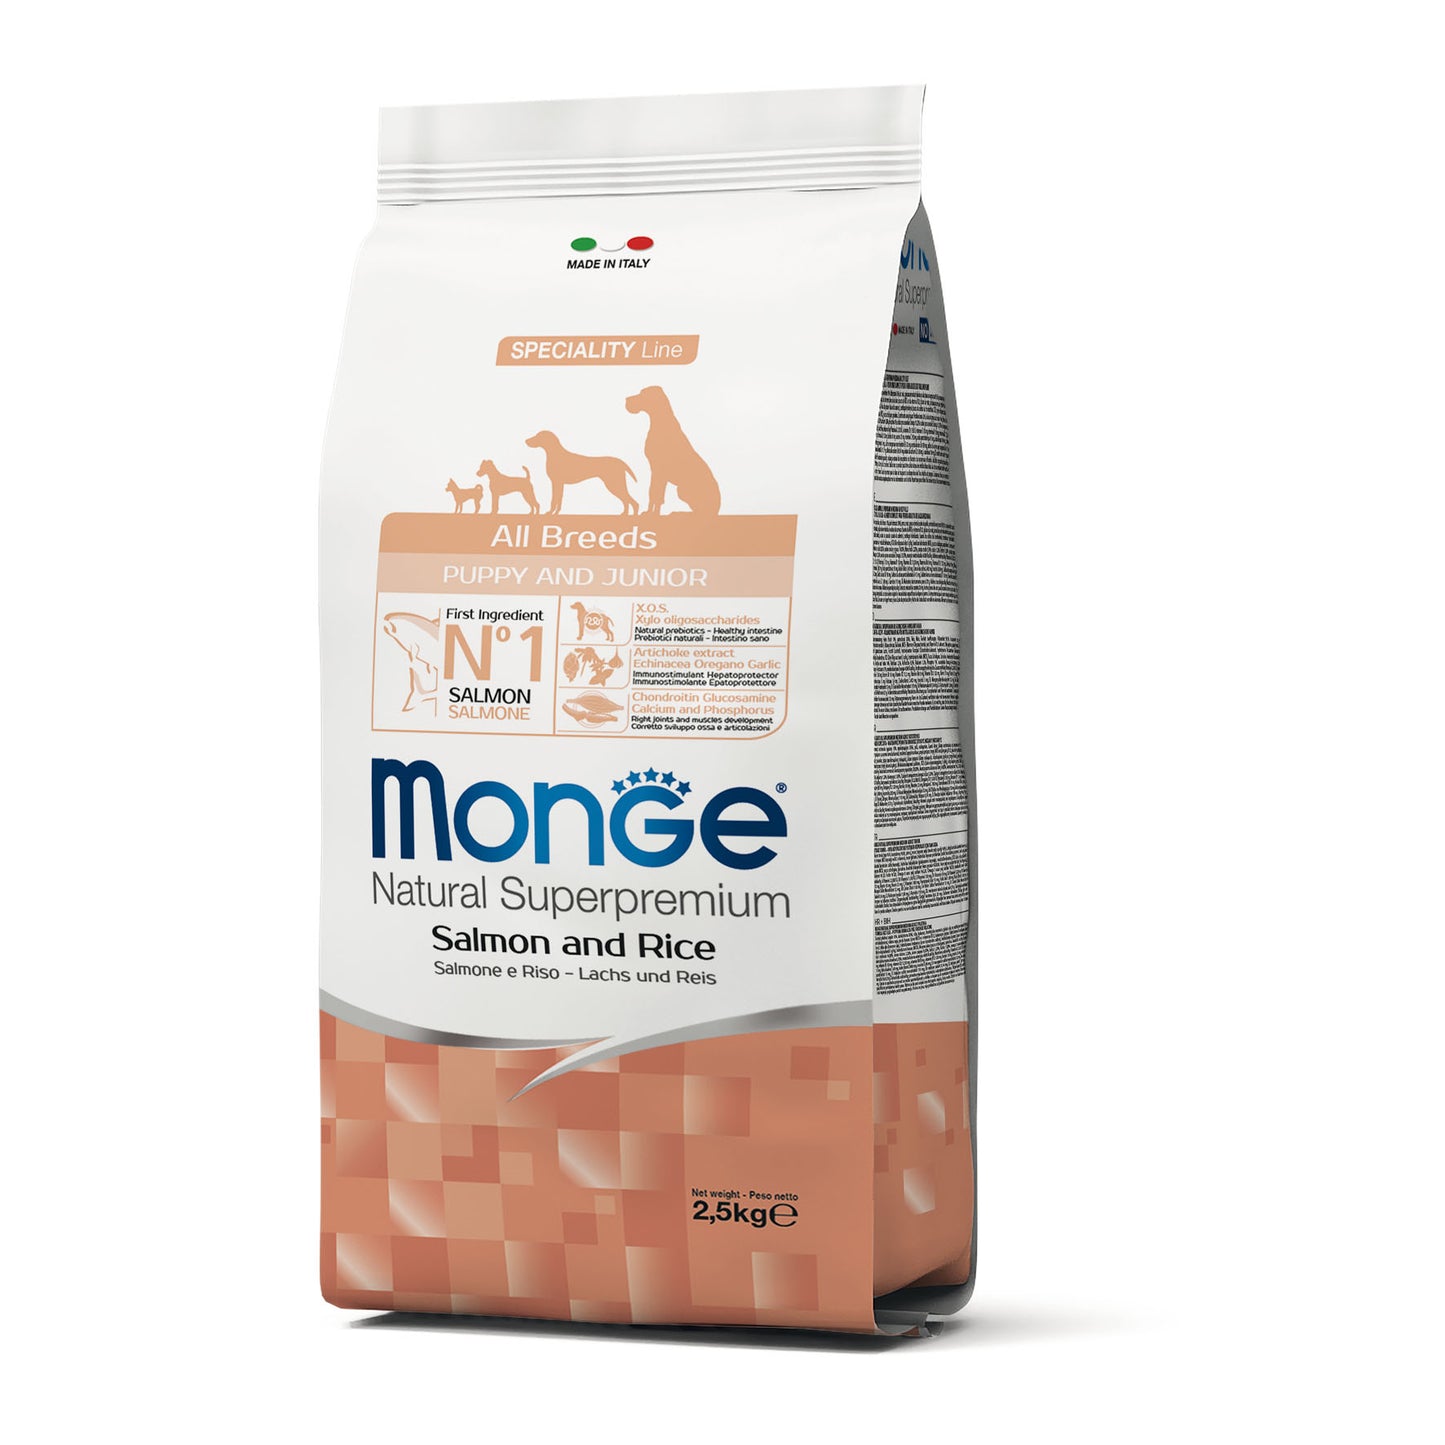 Monge Dog - SPECIALITY Line - Monoprotein - Puppy&Junior ALL BREEDS Salmon